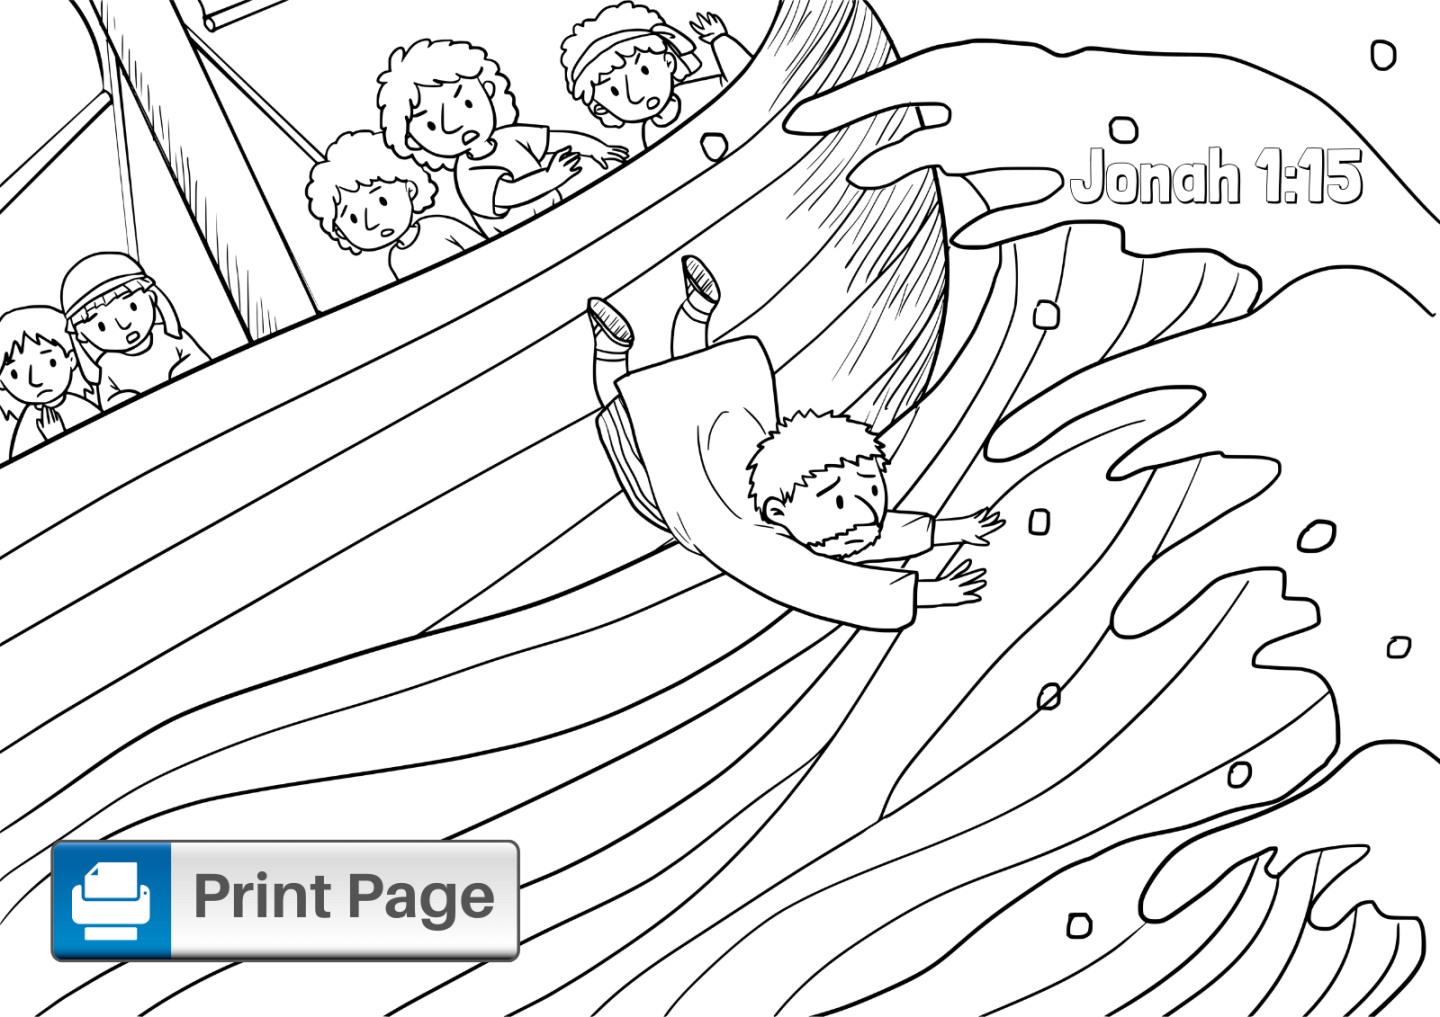 Free Printable Jonah and the Whale Coloring Pages – ConnectUS